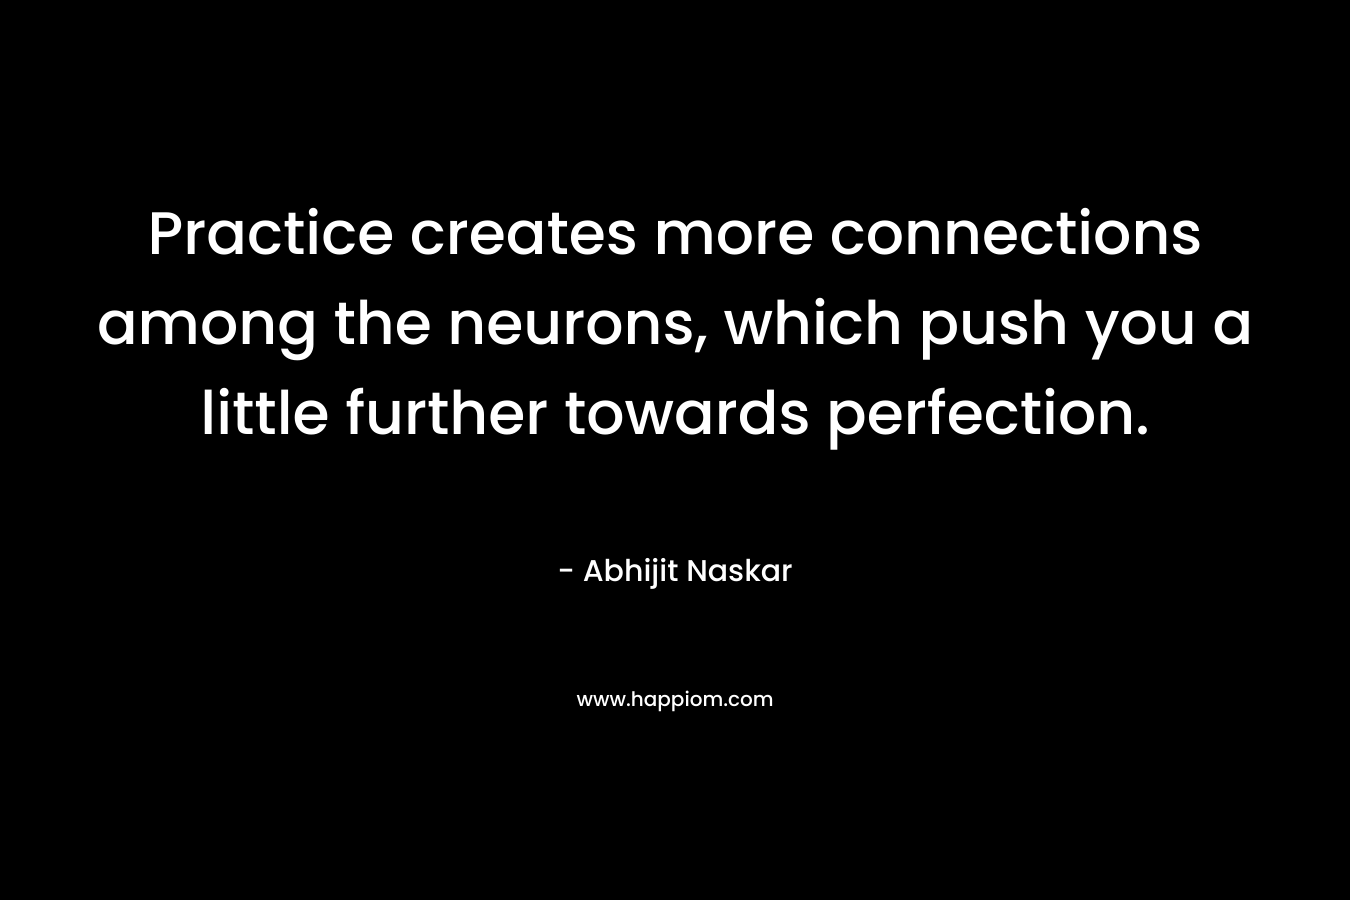 Practice creates more connections among the neurons, which push you a little further towards perfection. – Abhijit Naskar